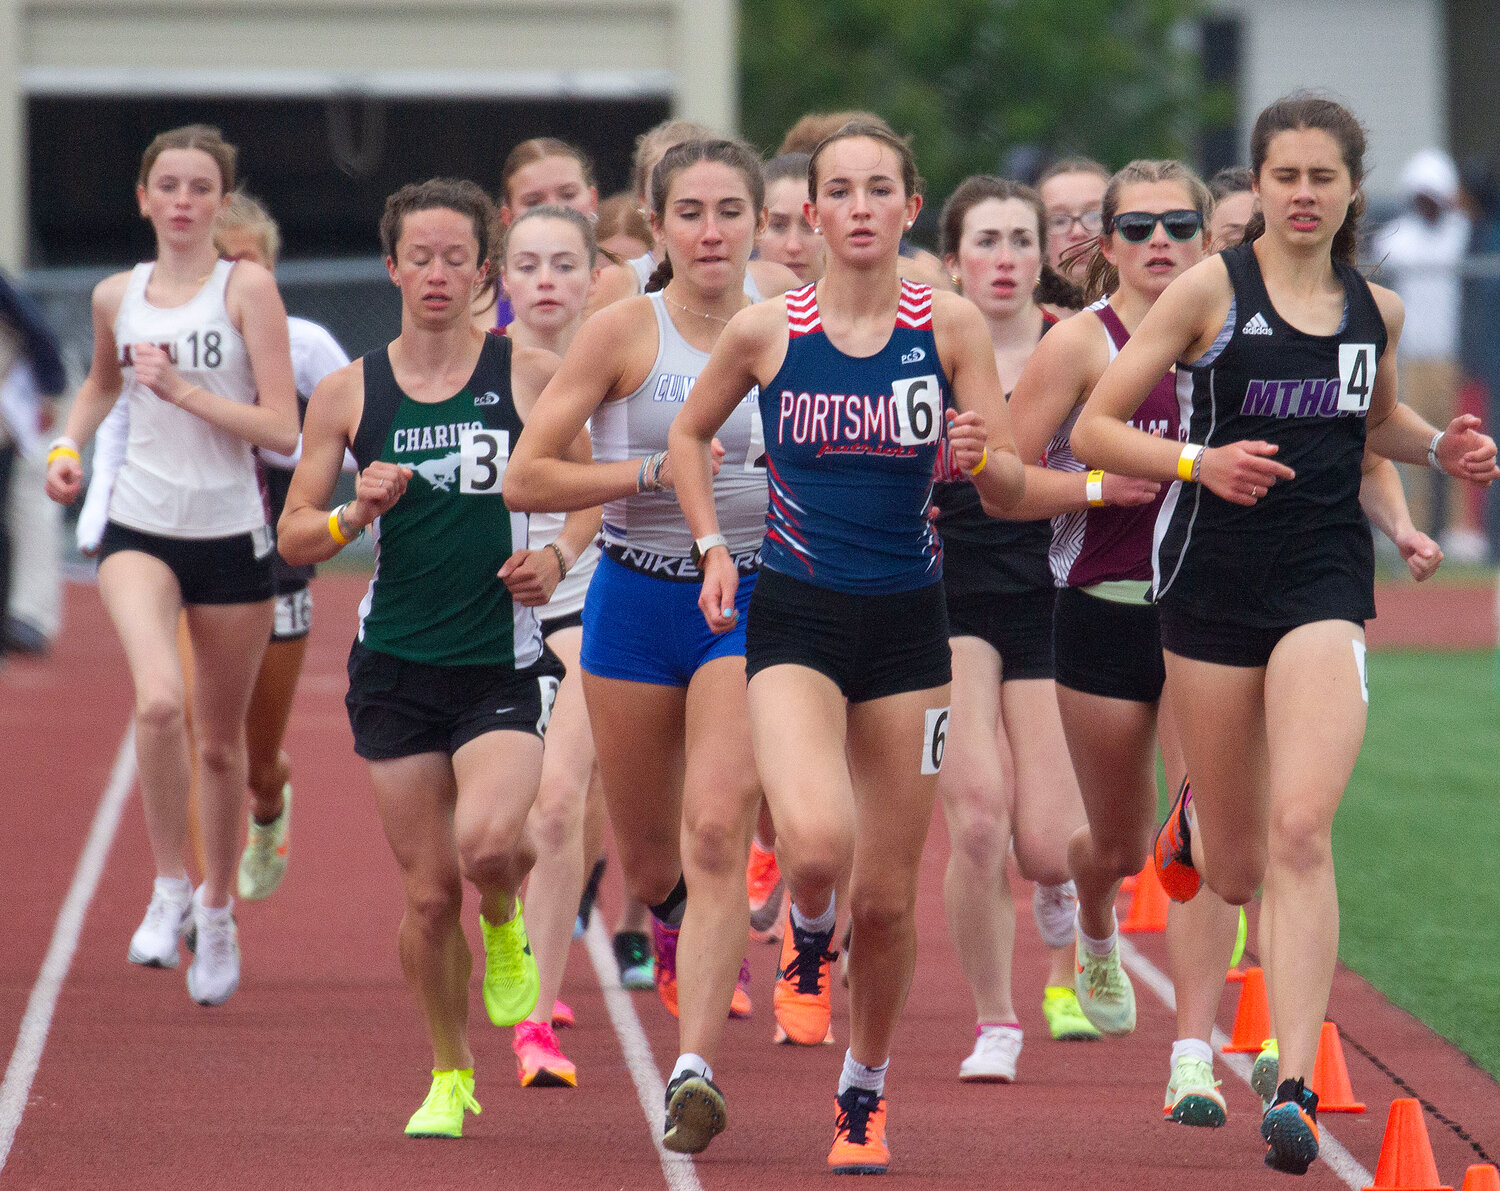 Jessica Deal (right) keeps pace with Portsmouth's Allie Kaull (middle) and the leaders during the 3000-meter run.